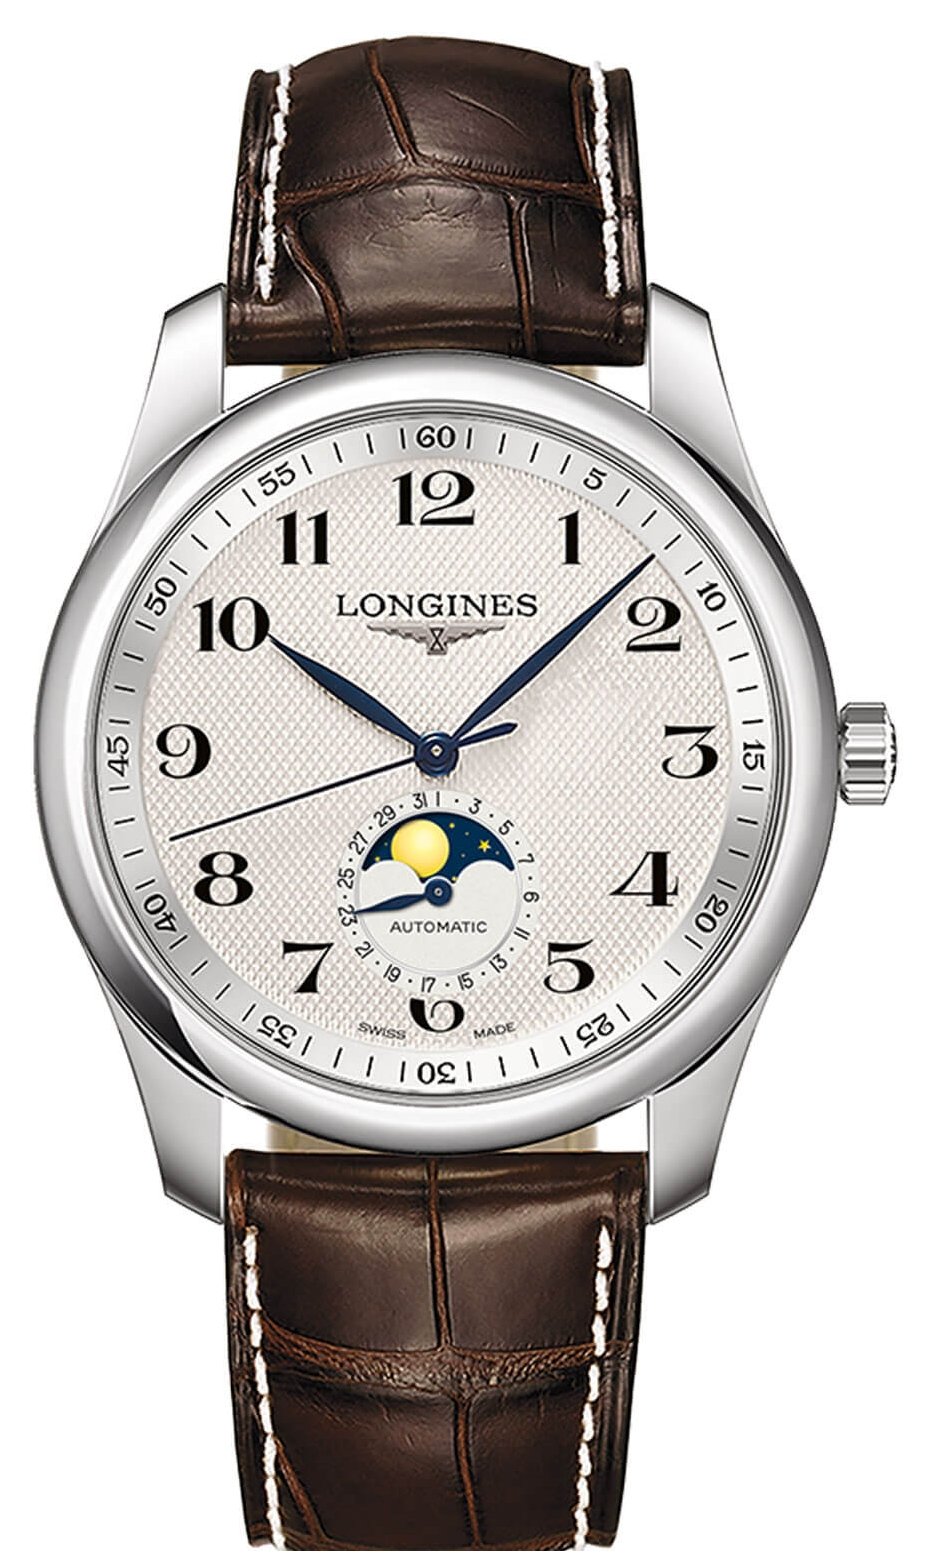 5 Things You Should Know Before Buying a Longines - First Class